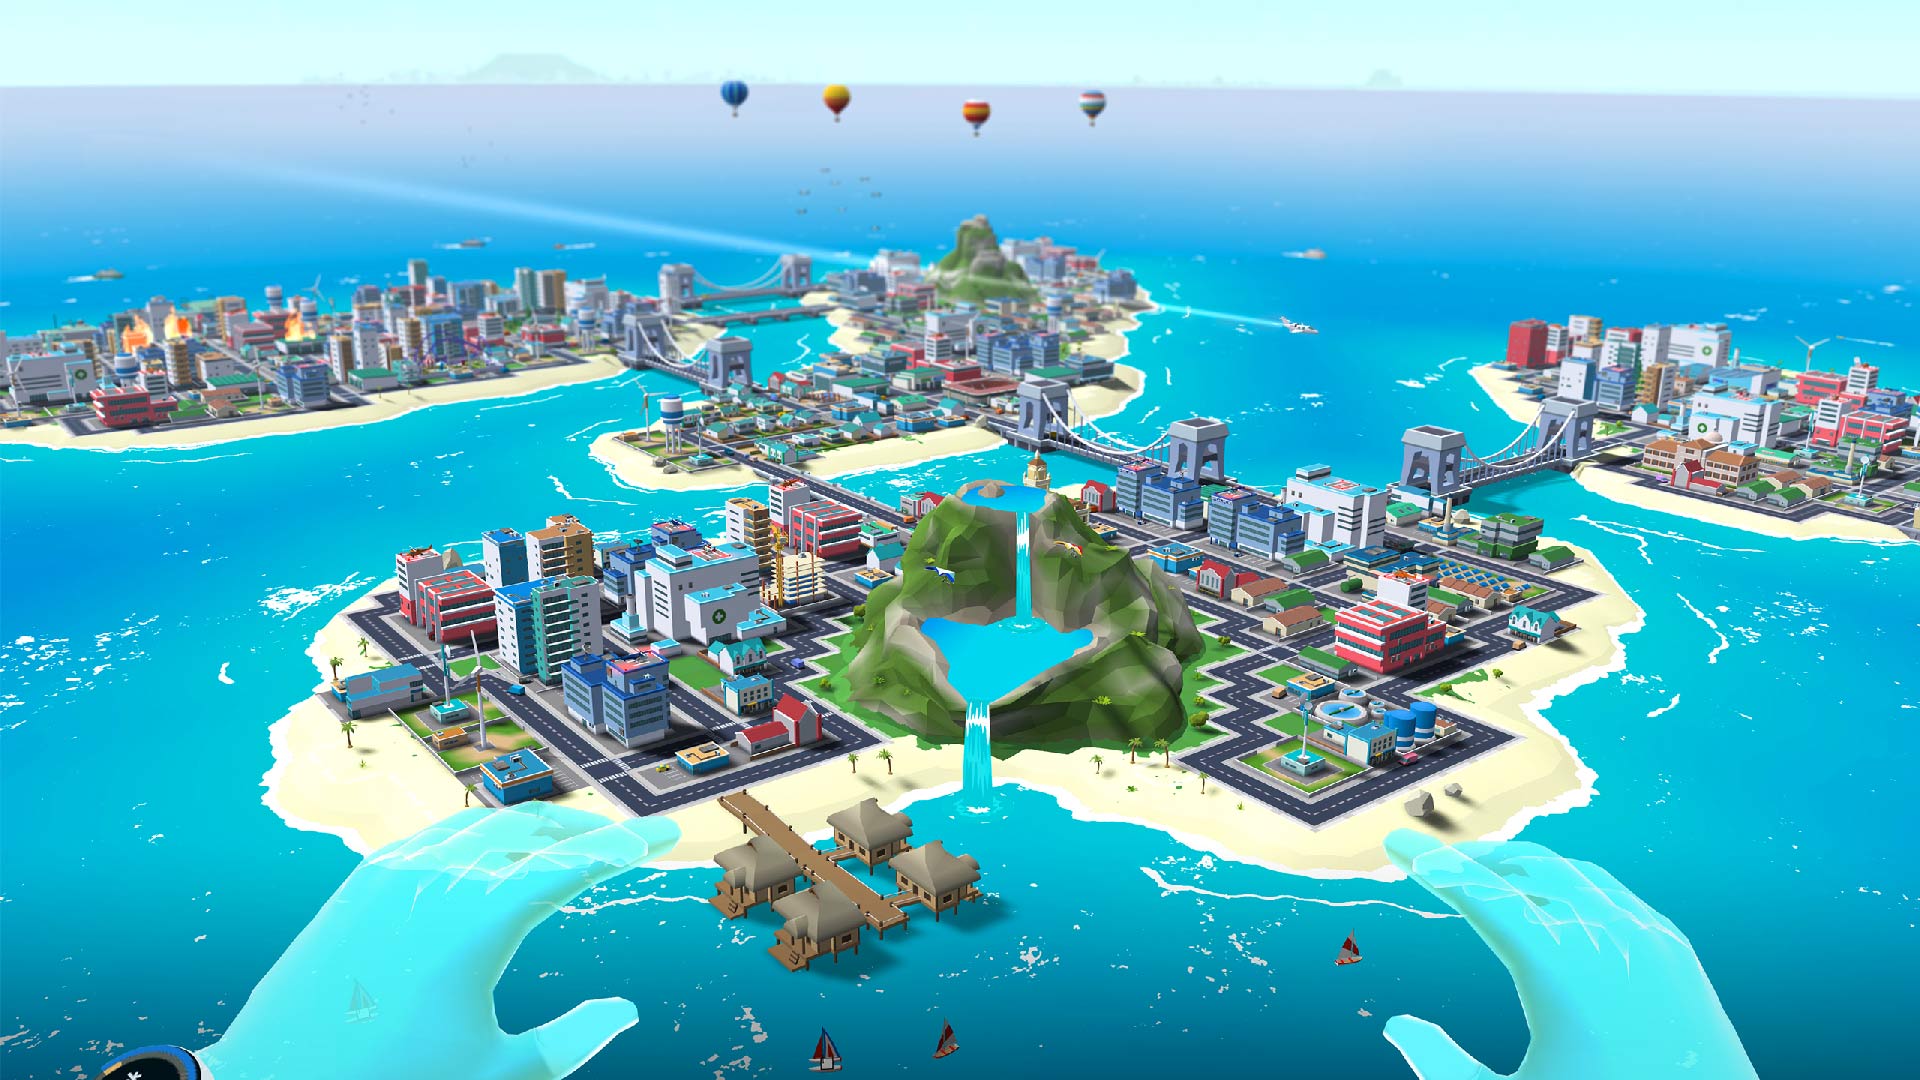 Pint Sized City Simulator 'Little Cities' Delayed To May 12th